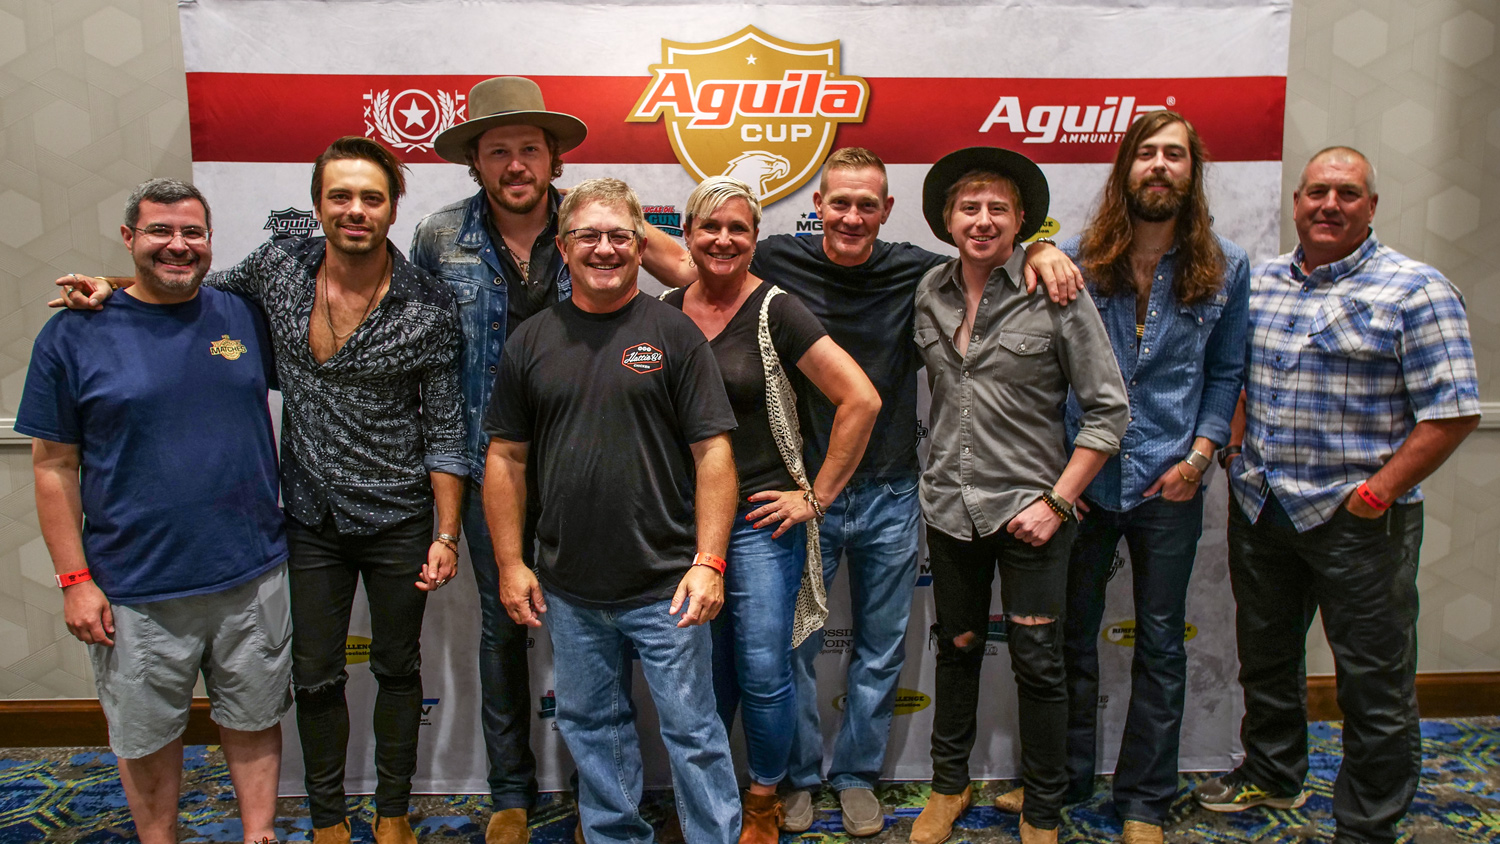 A Thousand Horses at 2018 Aguila Cup